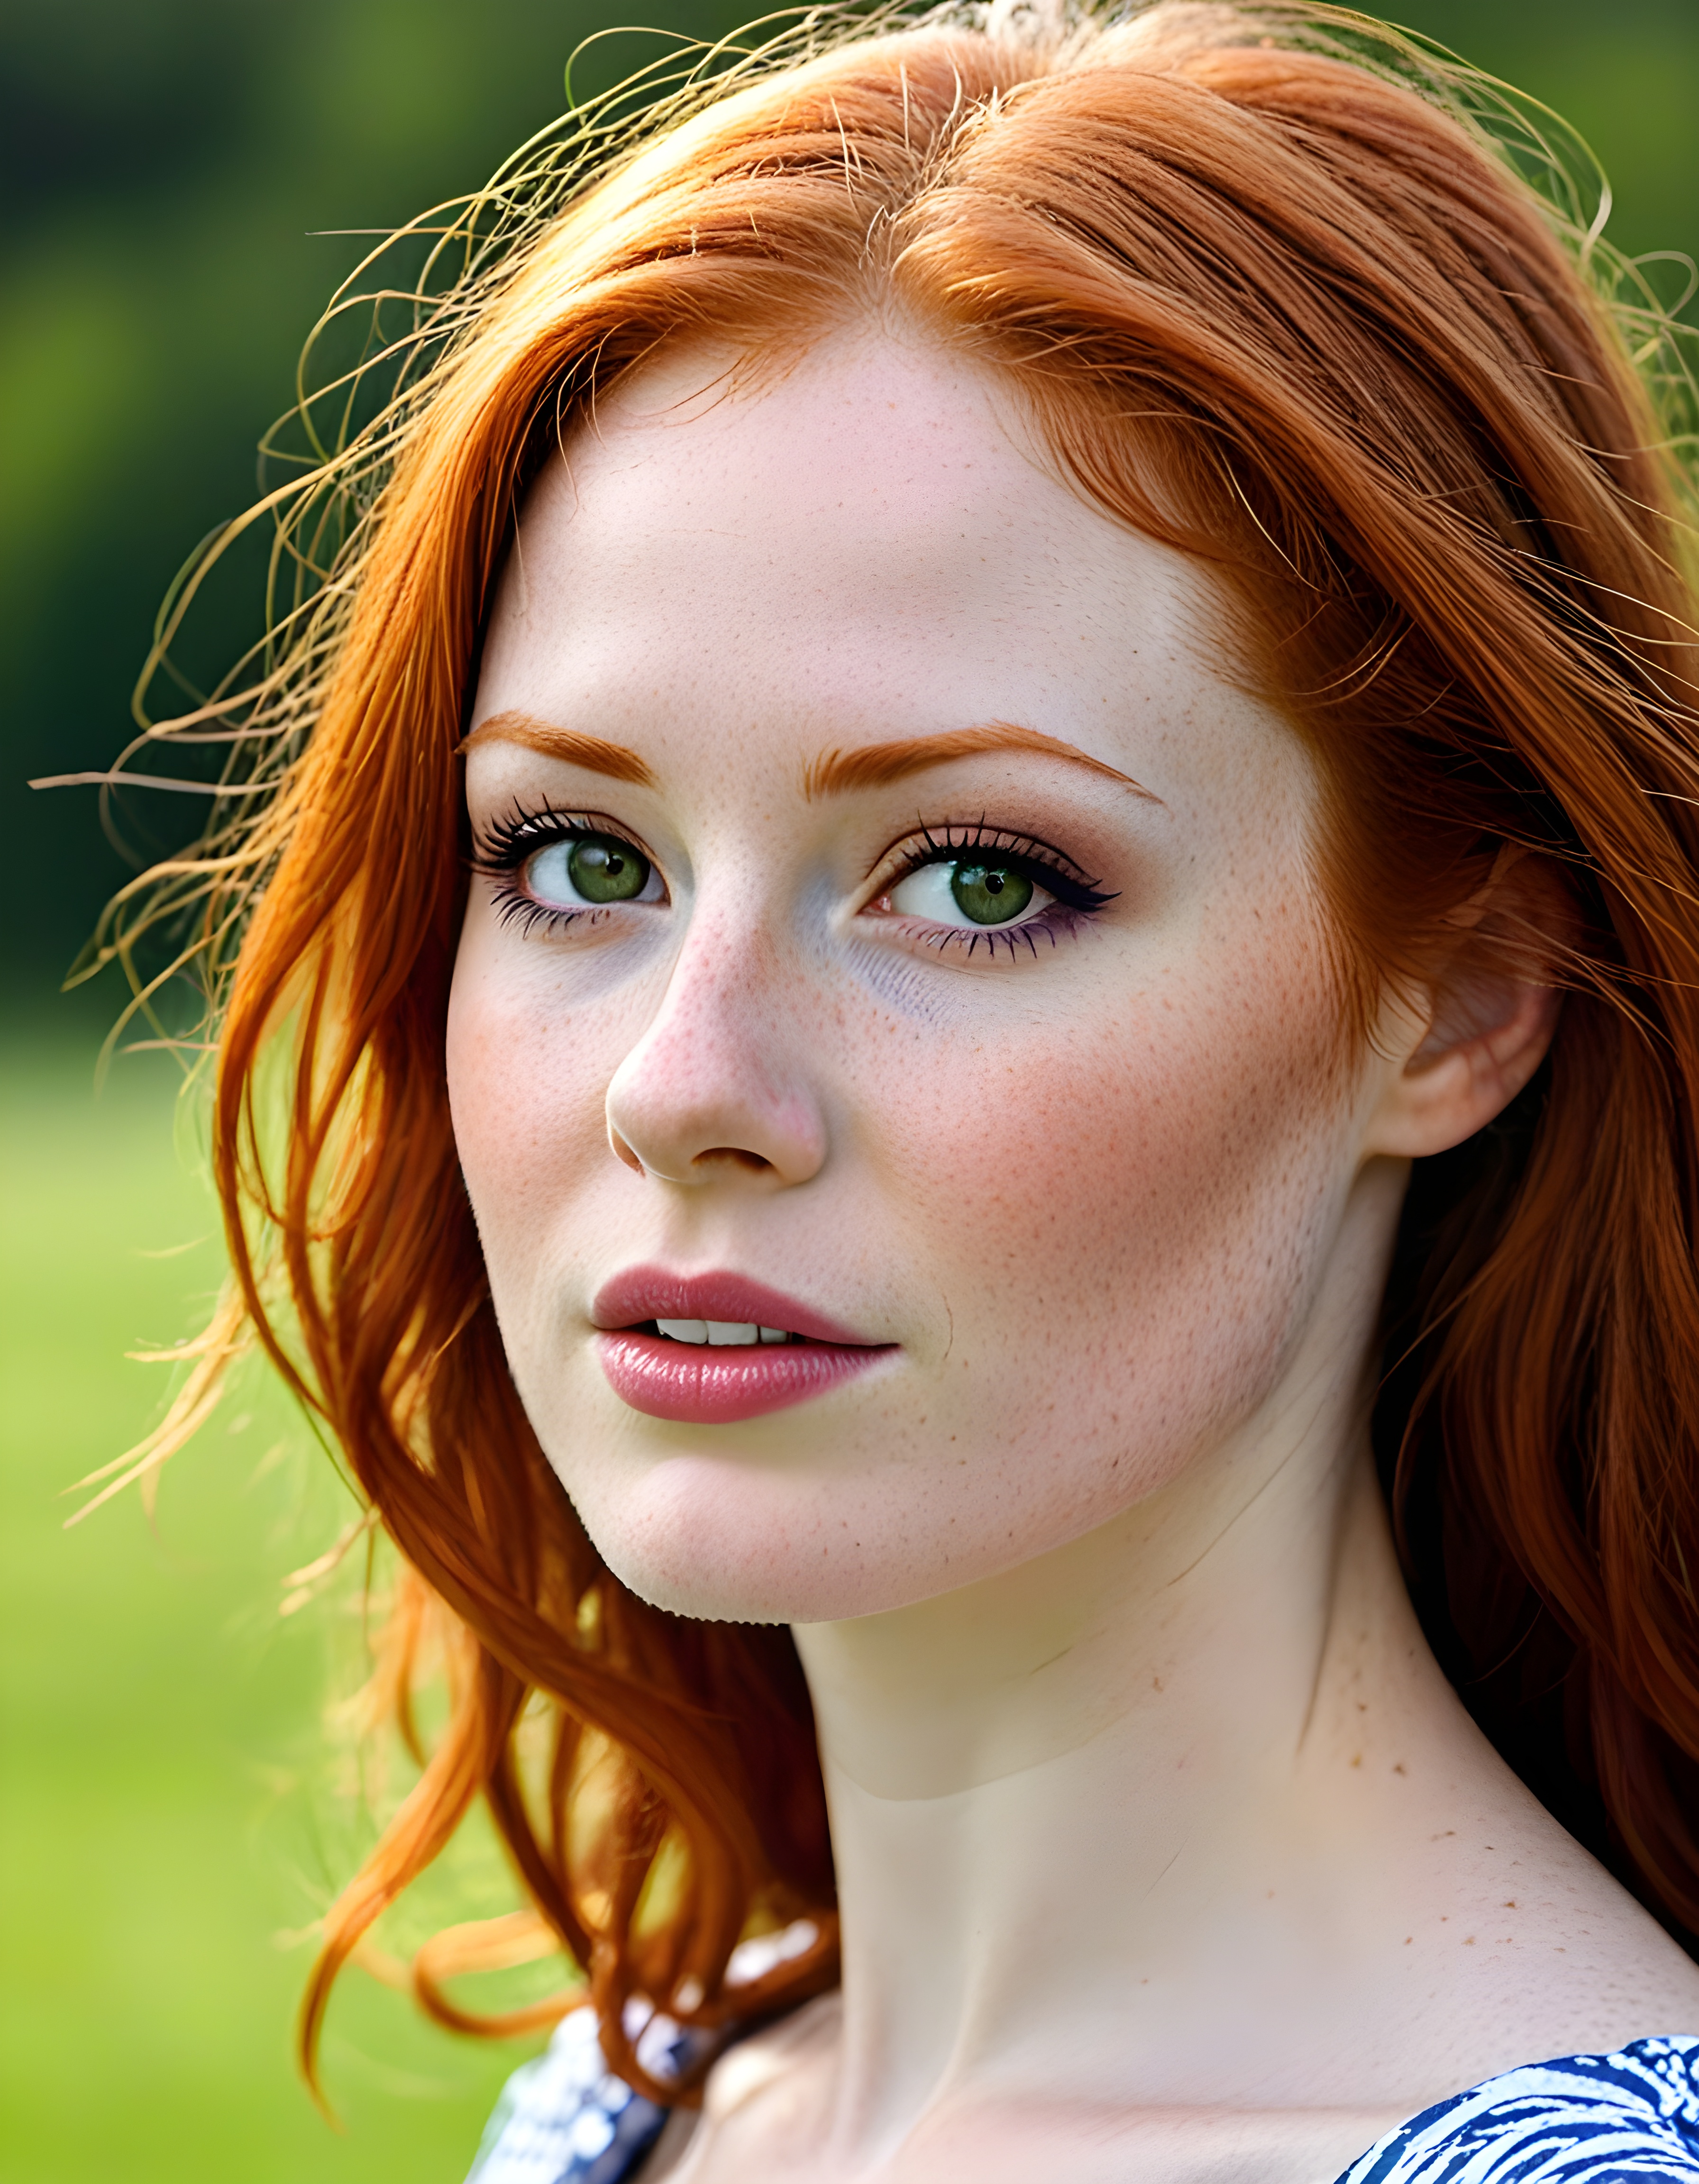 Portrait of a redheaded girl